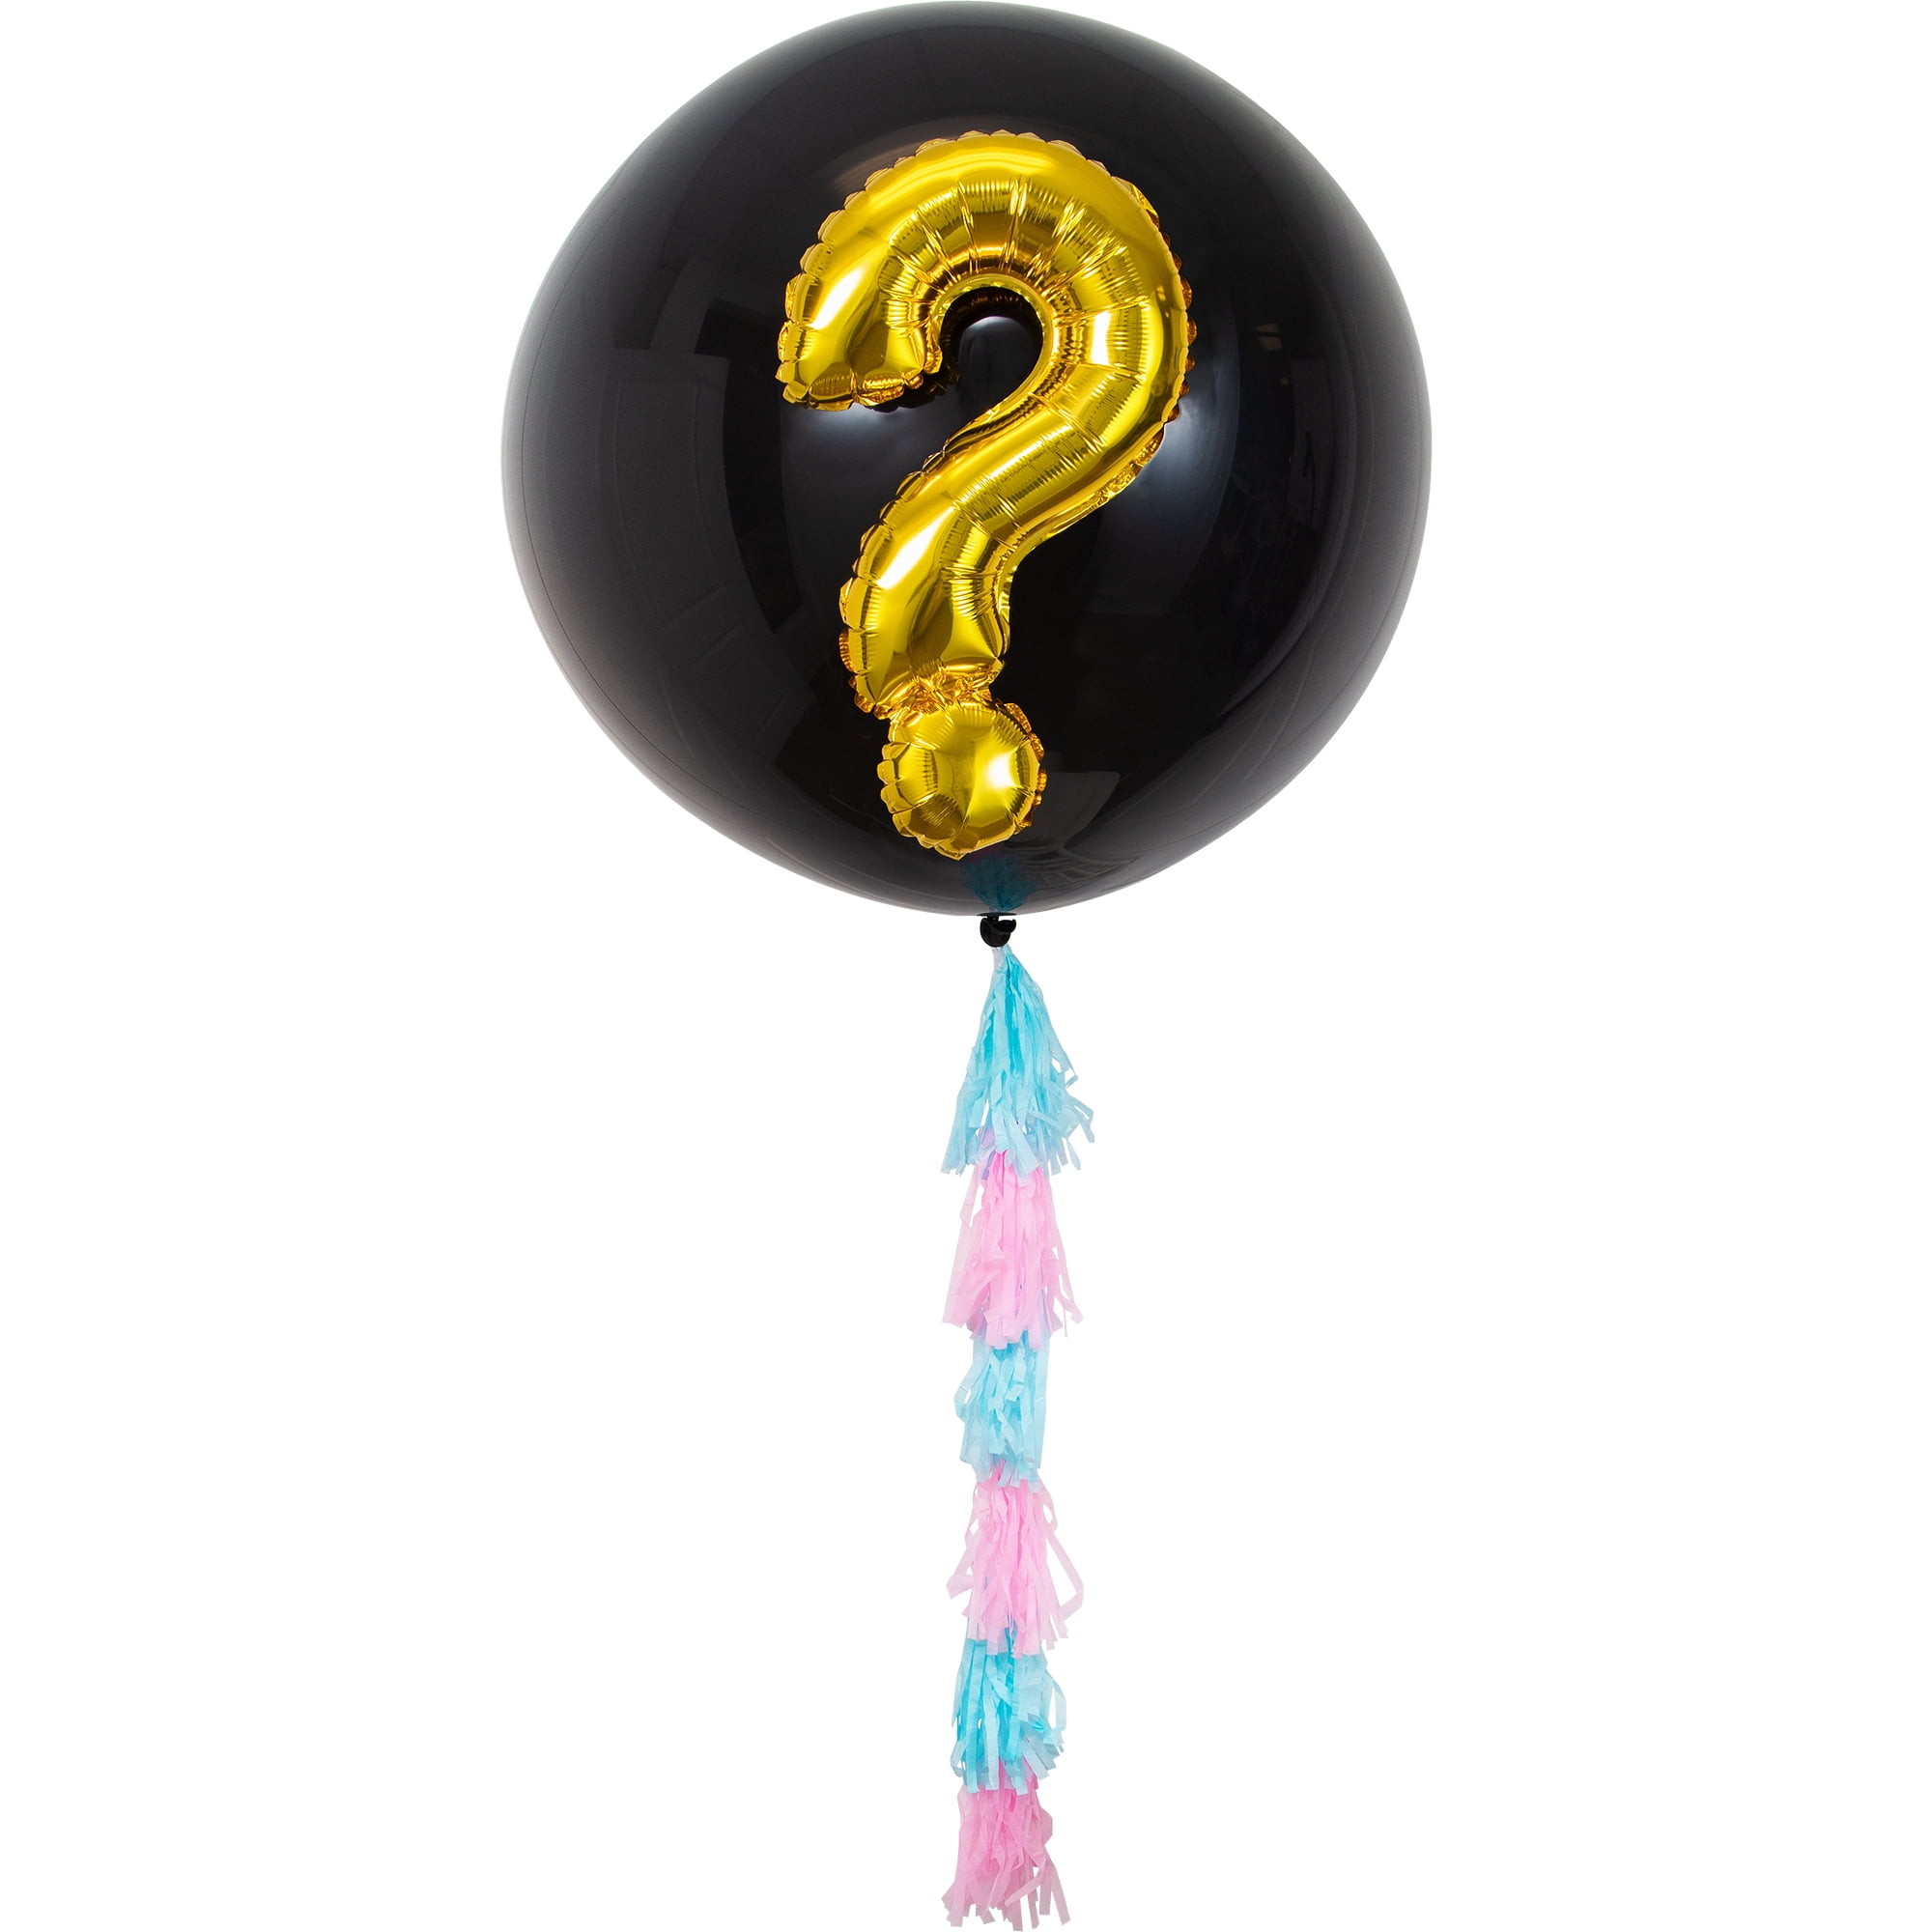 Way to Celebrate! Gender Reveal Multicolor Latex Balloon, 1 Ct., 36 Inches, Party Supplies